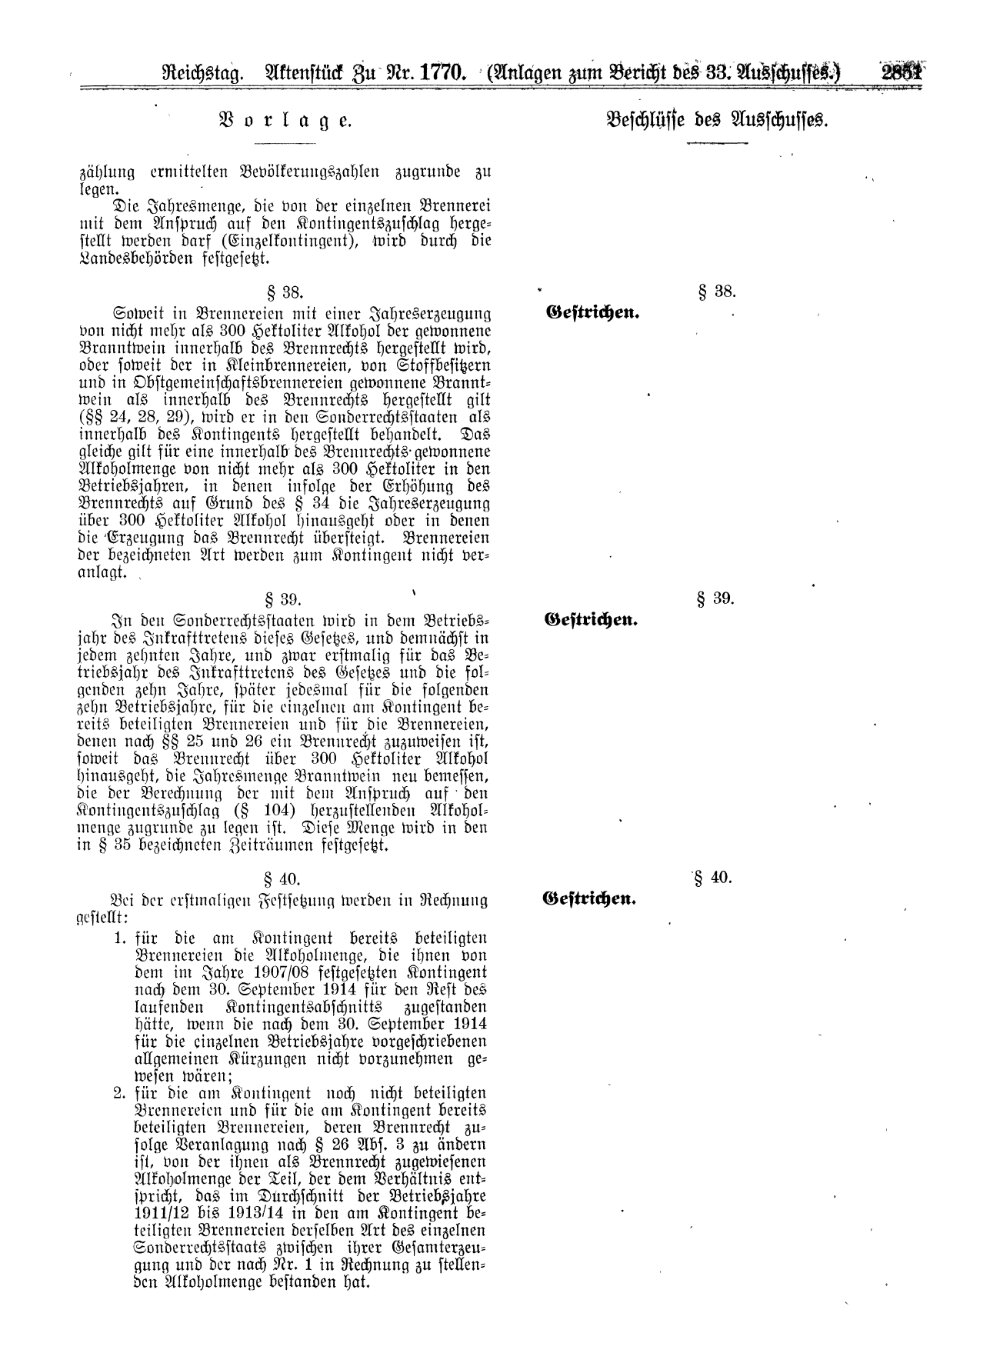 Scan of page 2851